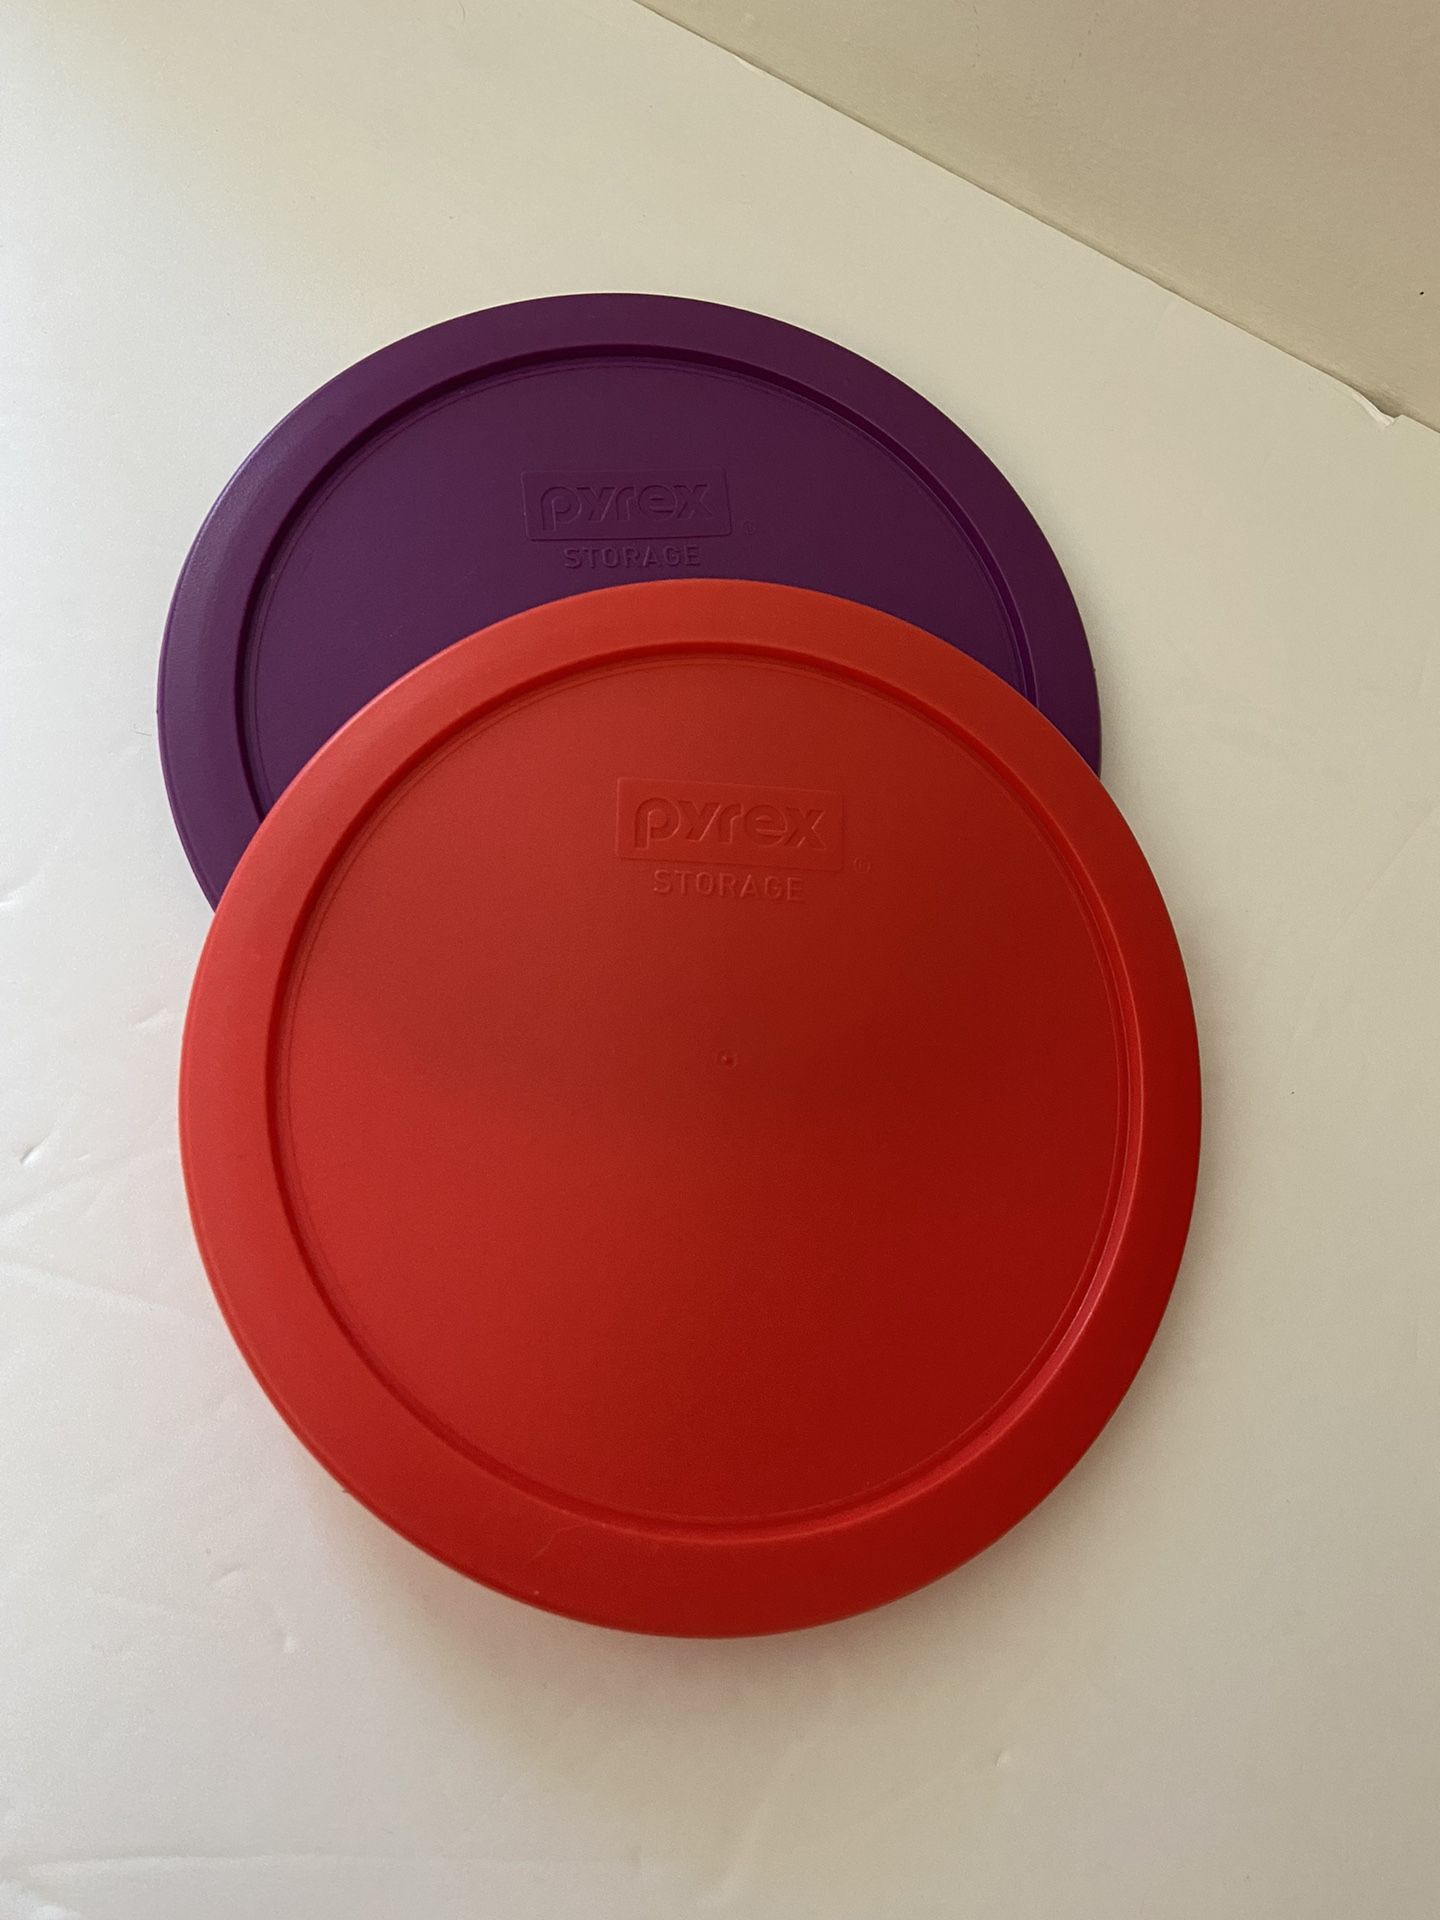 Pyrex 7402-PC Red/Purple Round Storage Replacement Lid Cover fits 6 & 7 Cup 7" Dia. Round (2-Pack)